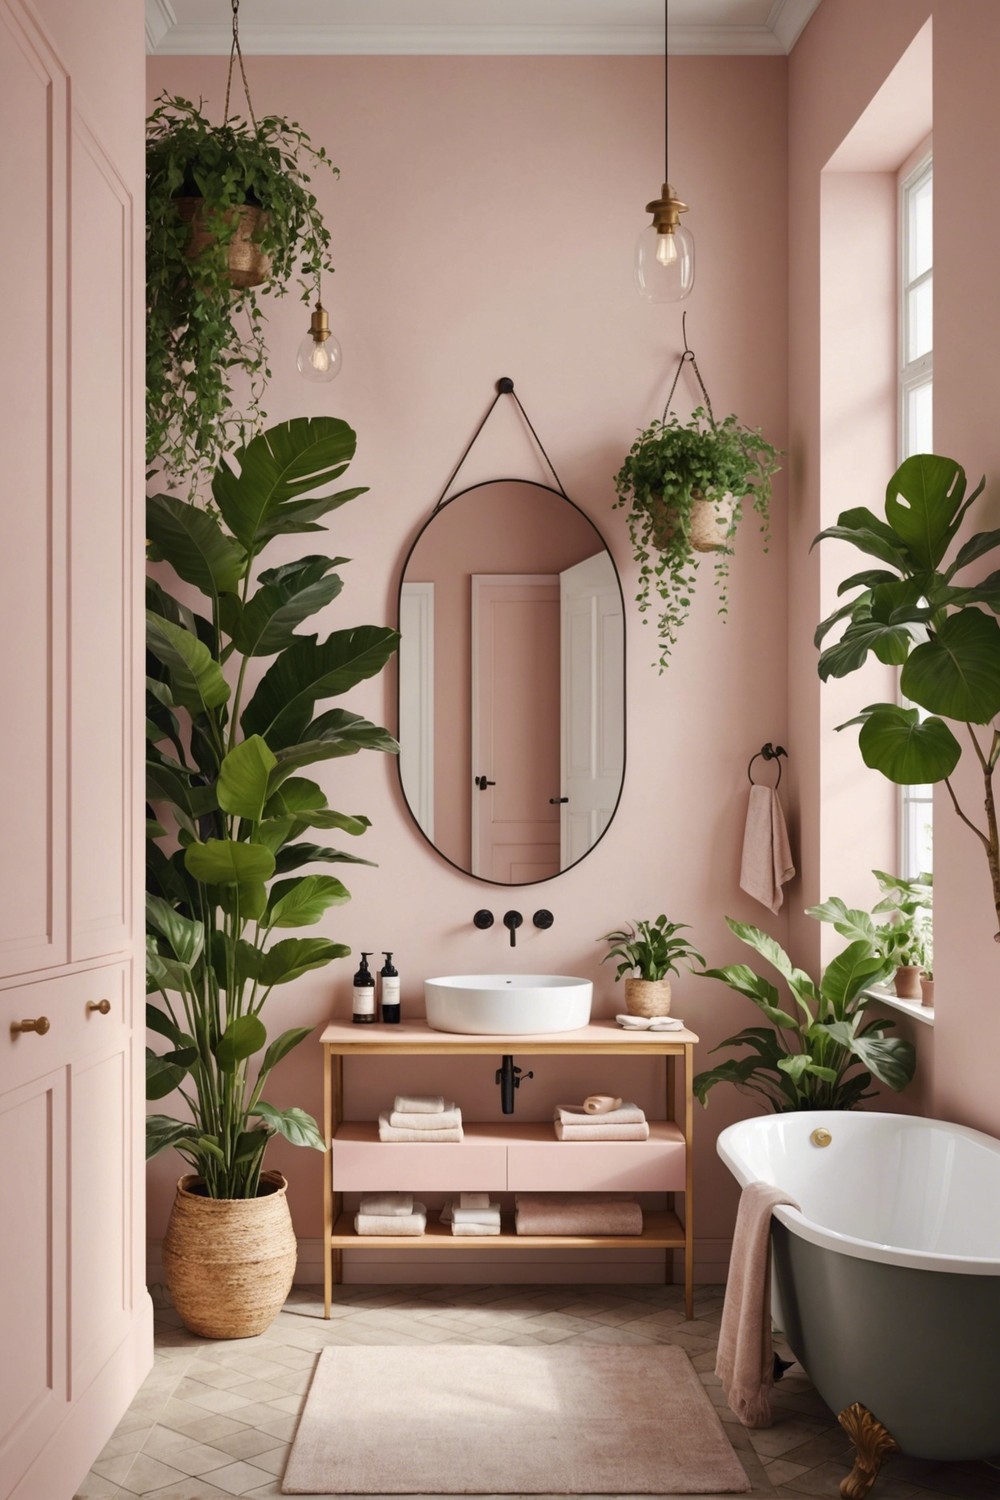 Berry Bliss: Pink and Green Bathroom Decor